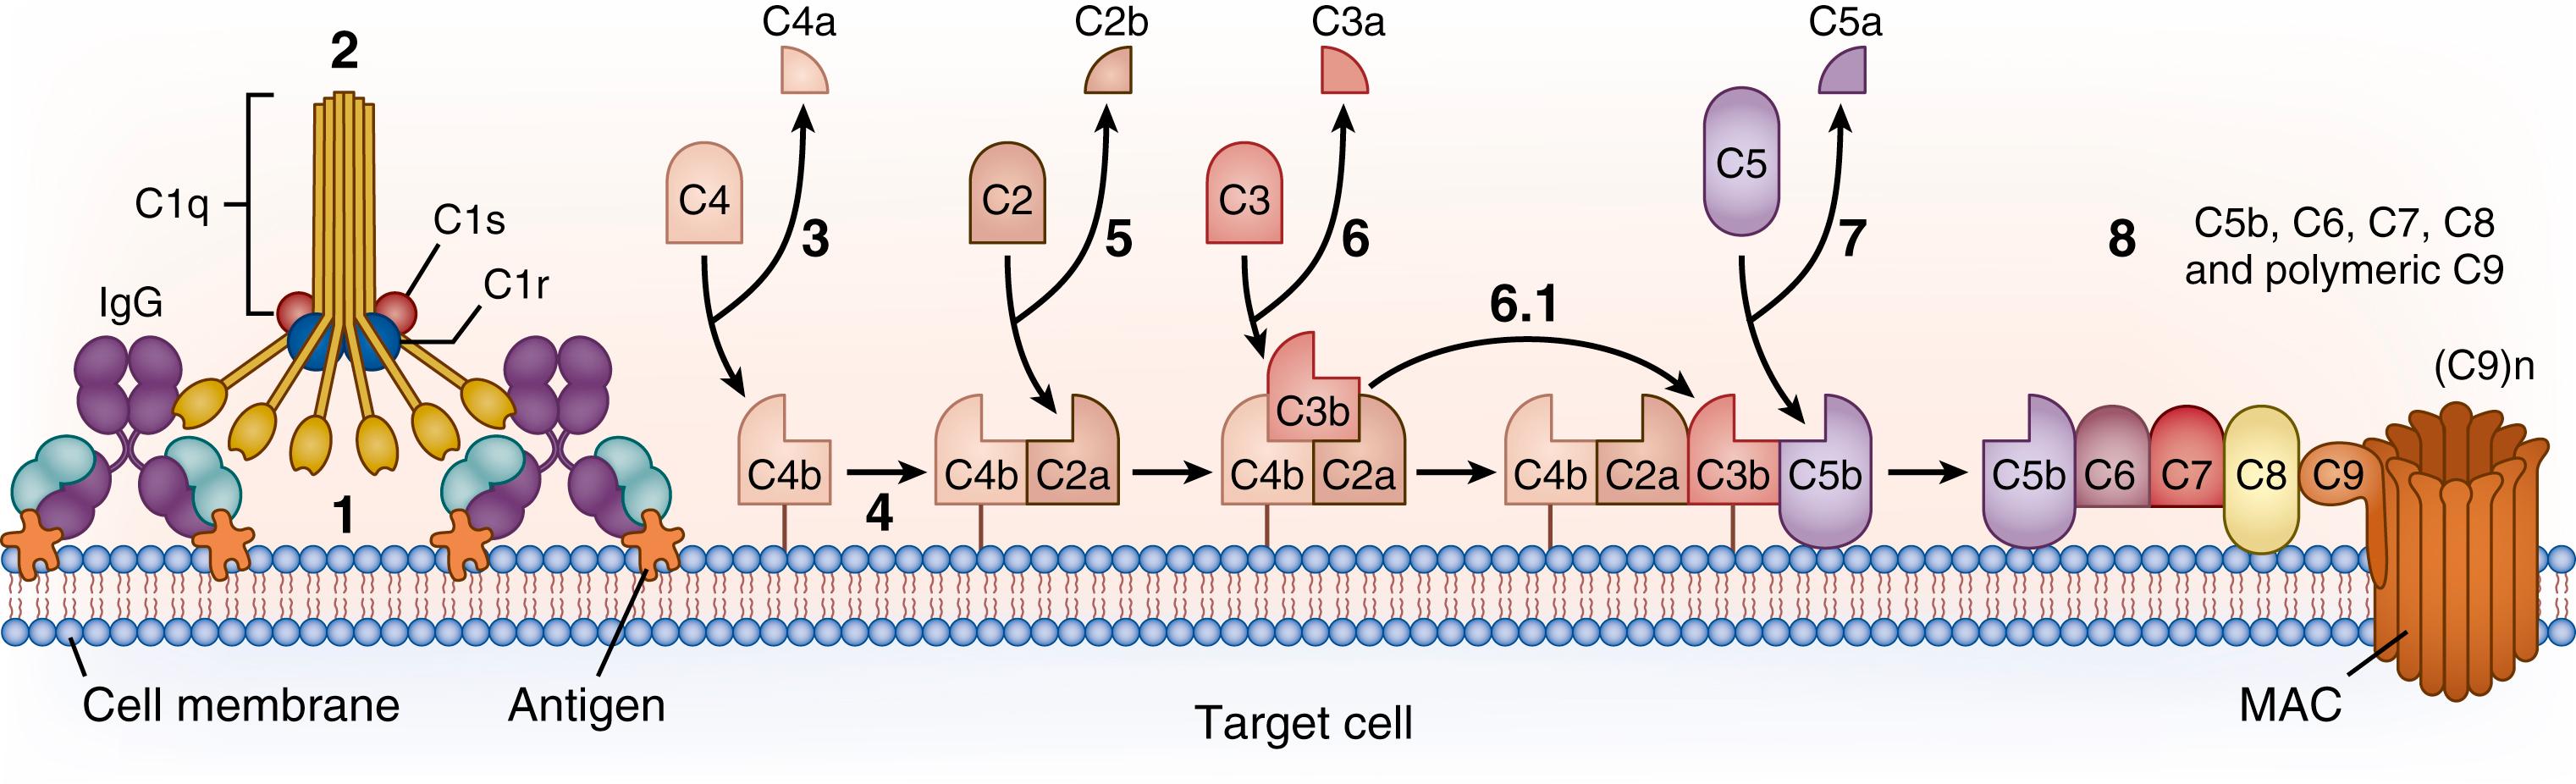 Fig. 120.1, Detailed schematic representation of the classical complement pathway, showing initiation by binding of the C1q component of C1 to the Fc domains of two or more immunoglobulin G (IgG) antibody molecules bound to antigen on the surface of a target cell. The numbers in bold indicate sequential steps that are involved in the activation of each of the components leading to the final lytic event carried out by the membrane attack complex (MAC) . (Some sources now use a revised nomenclature for the fragment of C2 , in which C2a is the small fragment which diffuses away and C2b is the larger fragment that binds with C4b and acts in the C3 convertase, C4b2b. ) 1. Binding of multiple IgGs or multiple Fabs of IgM to antigen. 2. Binding of C1q to multiple Fcs of IgG or IgM activates C1r, which activates C1s. 3. Cleavage of C4 by C1s. C4b becomes covalently attached to target. 4. C2 binds to C4b. 5. C2 bound to C4b is cleaved by C1s. C2a remains with C4b, while C2b diffuses away. 6. C3 binds to C4b2a, the classical pathway C3 convertase. C2a cleaves C3, and C3b becomes covalently attached to target. 6.1. Some C3b molecules may remain associated with C4b2a, forming the C5 convertase: C4b2a3b. 7. C5 is cleaved by the convertase. C5a, a potent chemoattractant and anaphylotoxin, diffuses away. C5b is lipophilic and associates with lipids in the cell membrane. 8. C6, C7, C8, and multiple molecules of C9 associate sequentially and form the membrane attack complex, a pore in the membrane lined by unfolded C9 molecules. Note that these steps do not involve enzymatic cleavage.